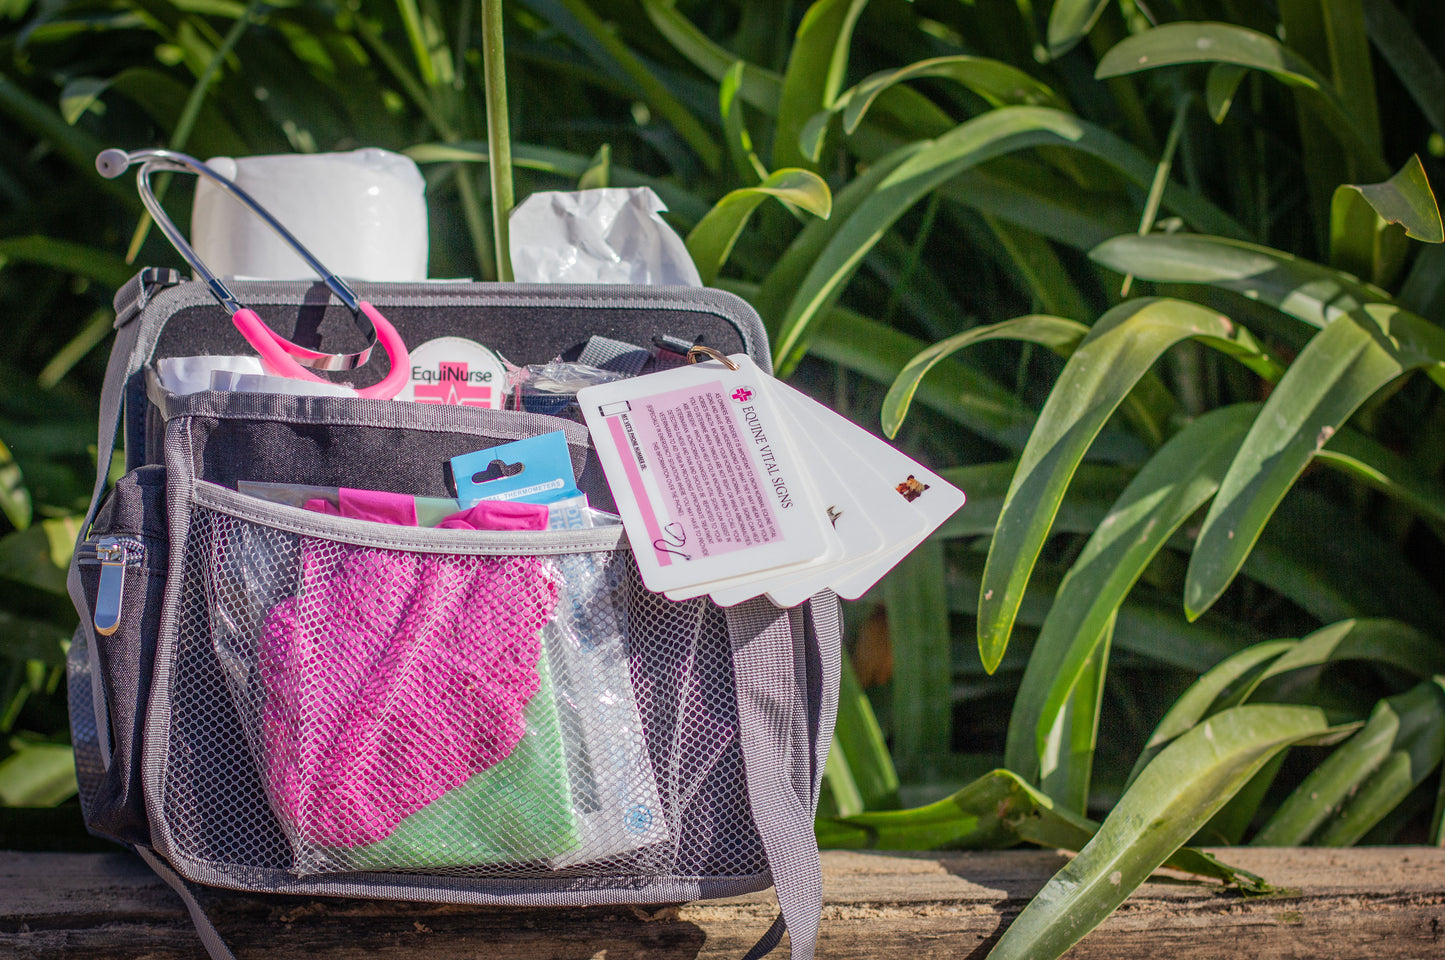 Equine first-aid kit 'The Essentials'